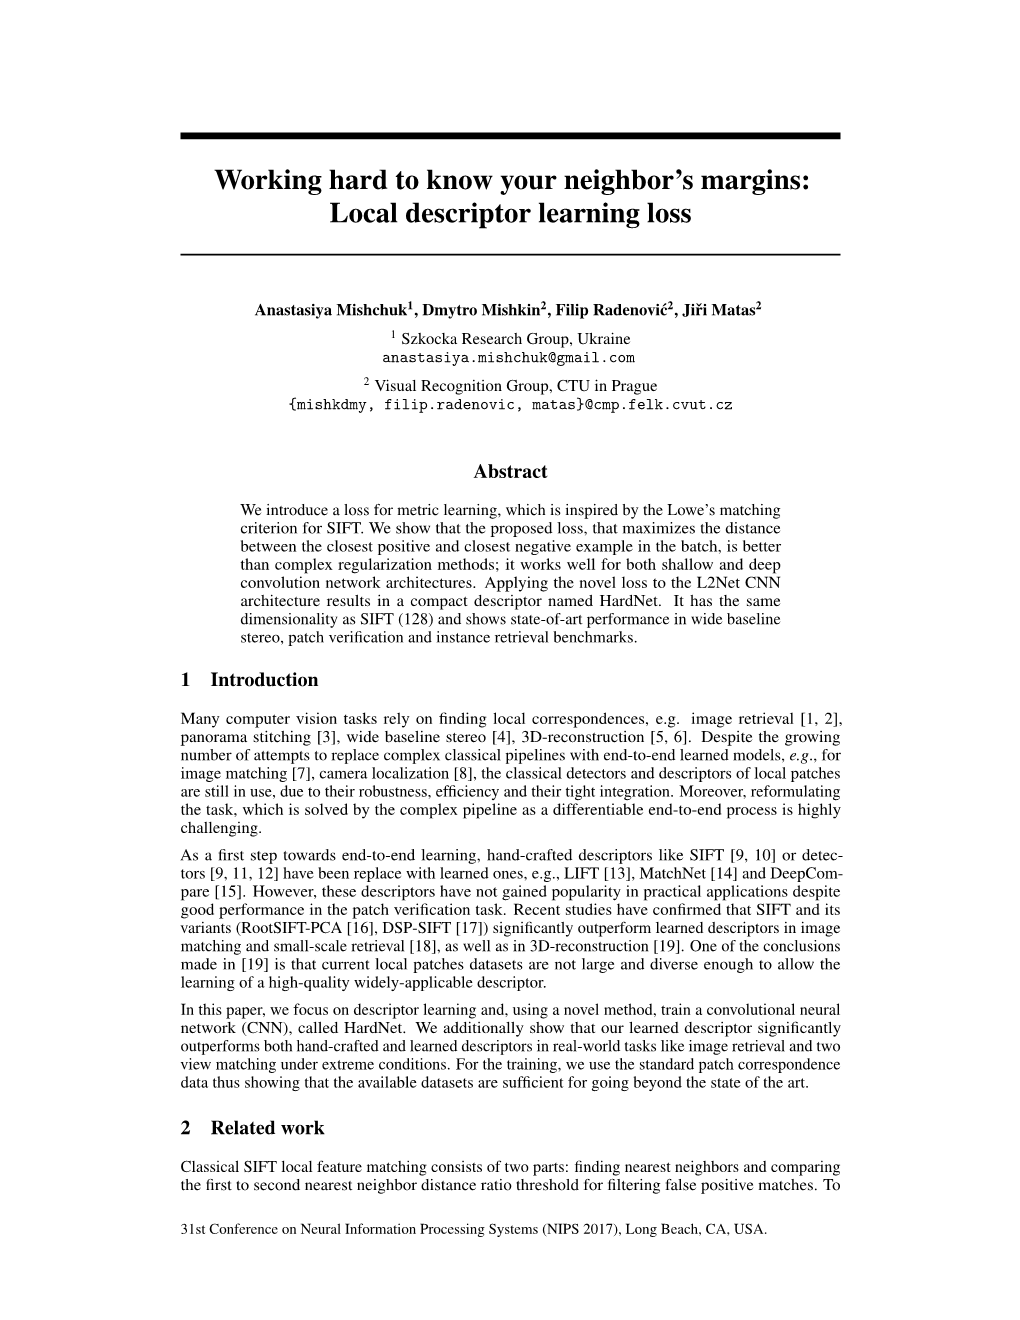 Working Hard to Know Your Neighbor's Margins: Local Descriptor Learning